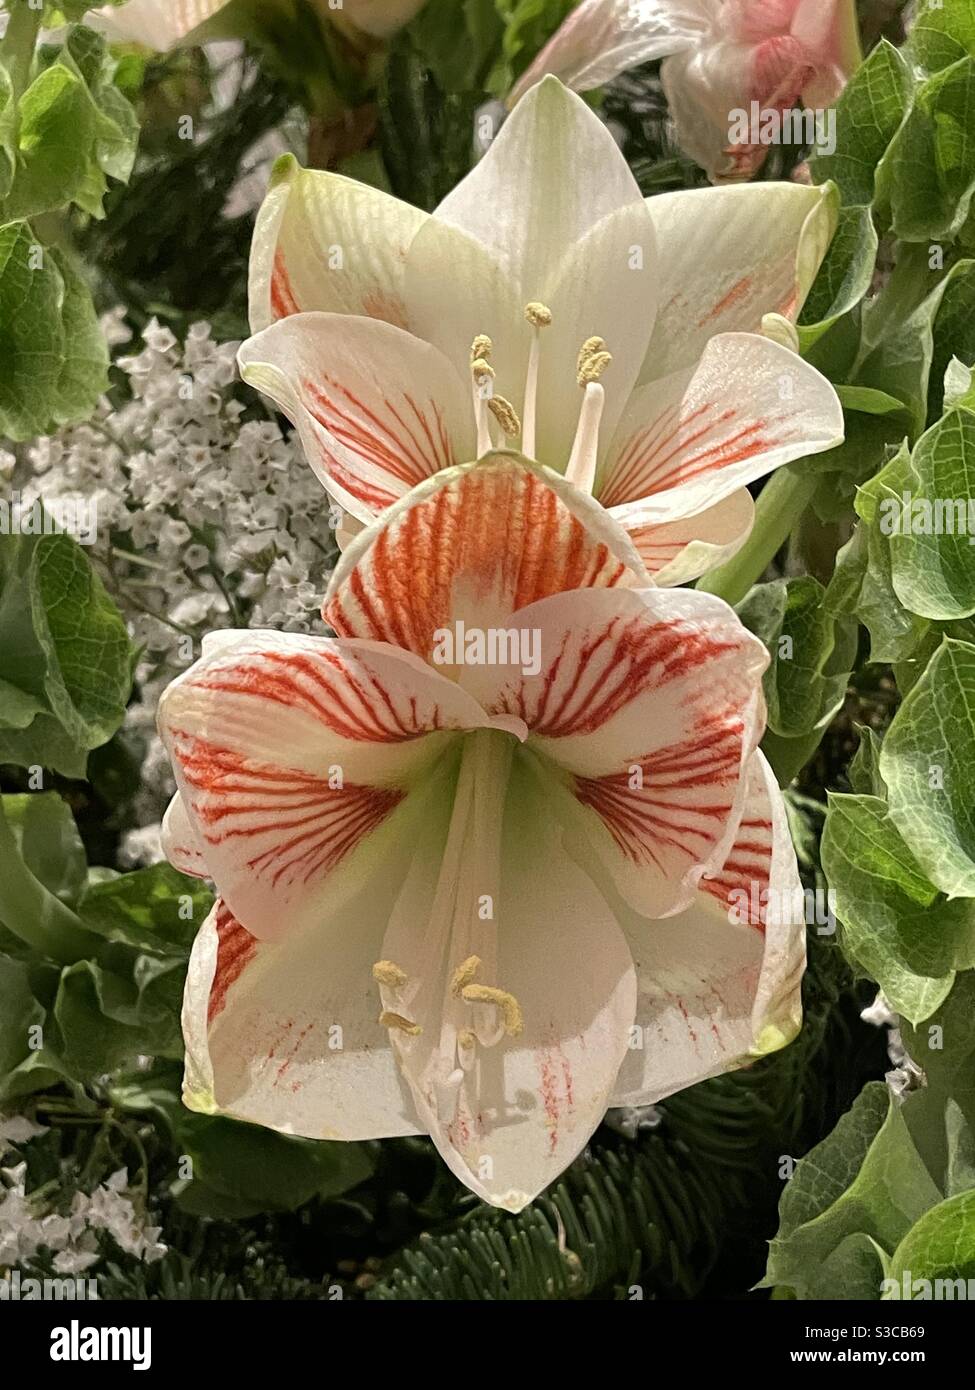 Red and white amaryllis flowers Stock Photo